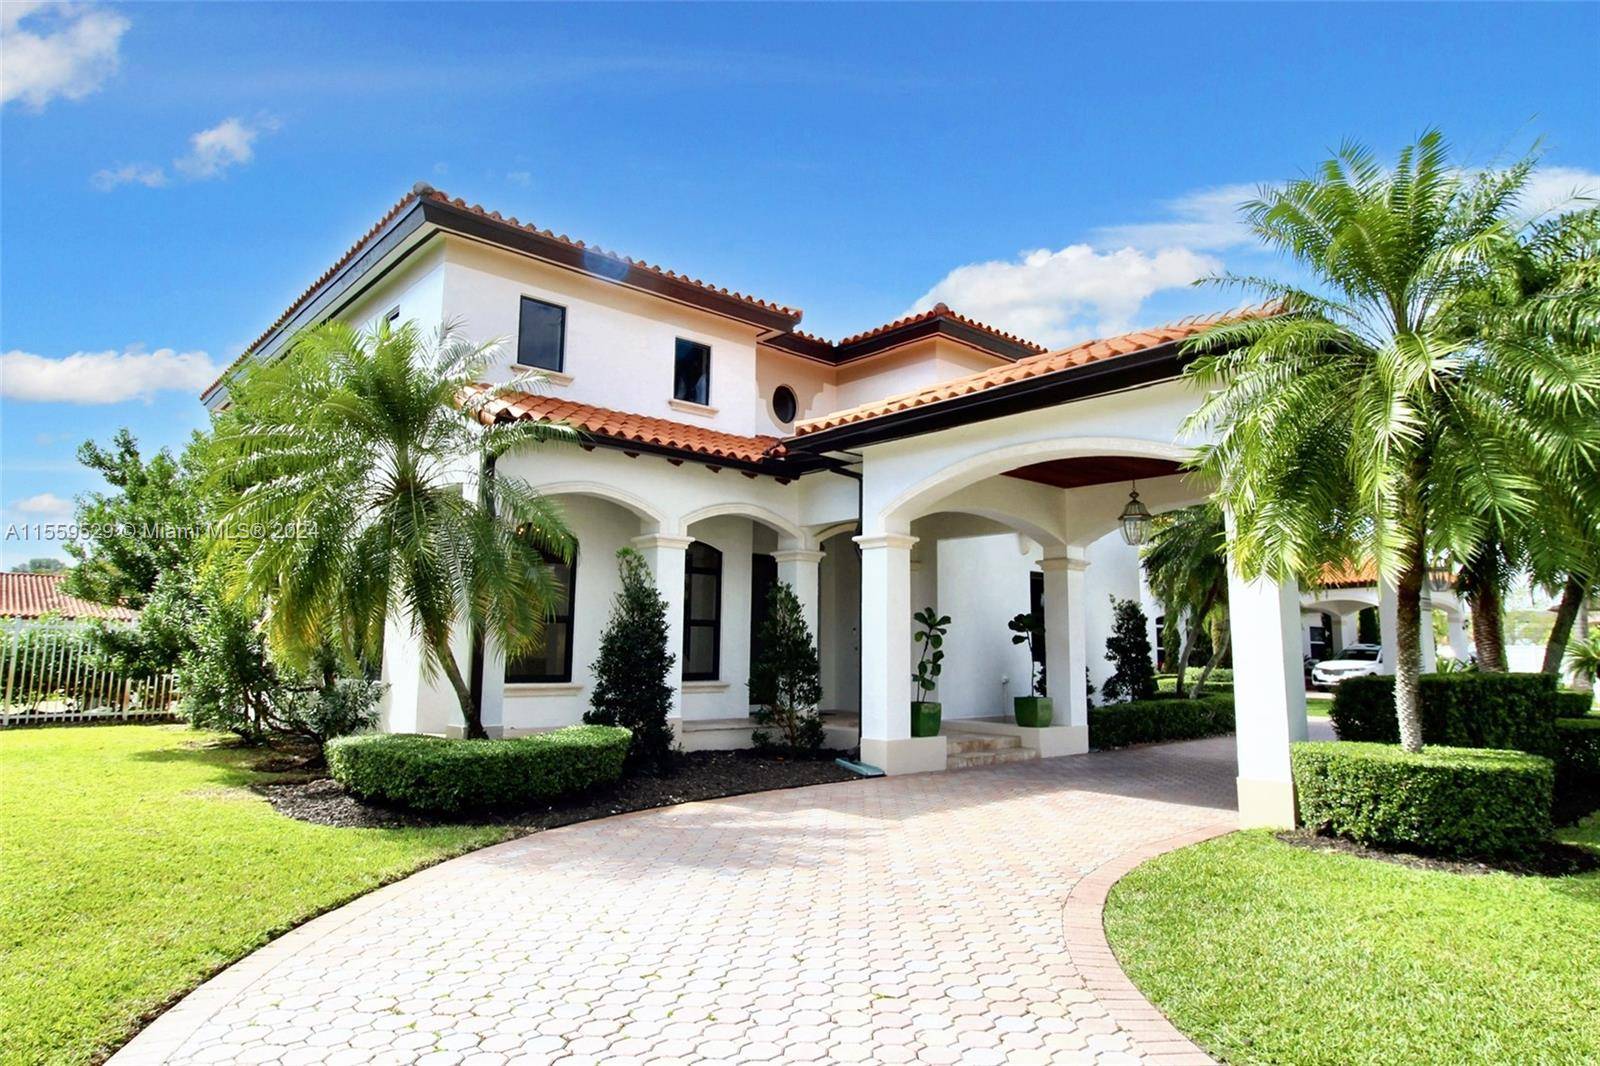 This spectacular Estate is located in the only gated community of 6 houses within the prestigious highly sought after Belen area.